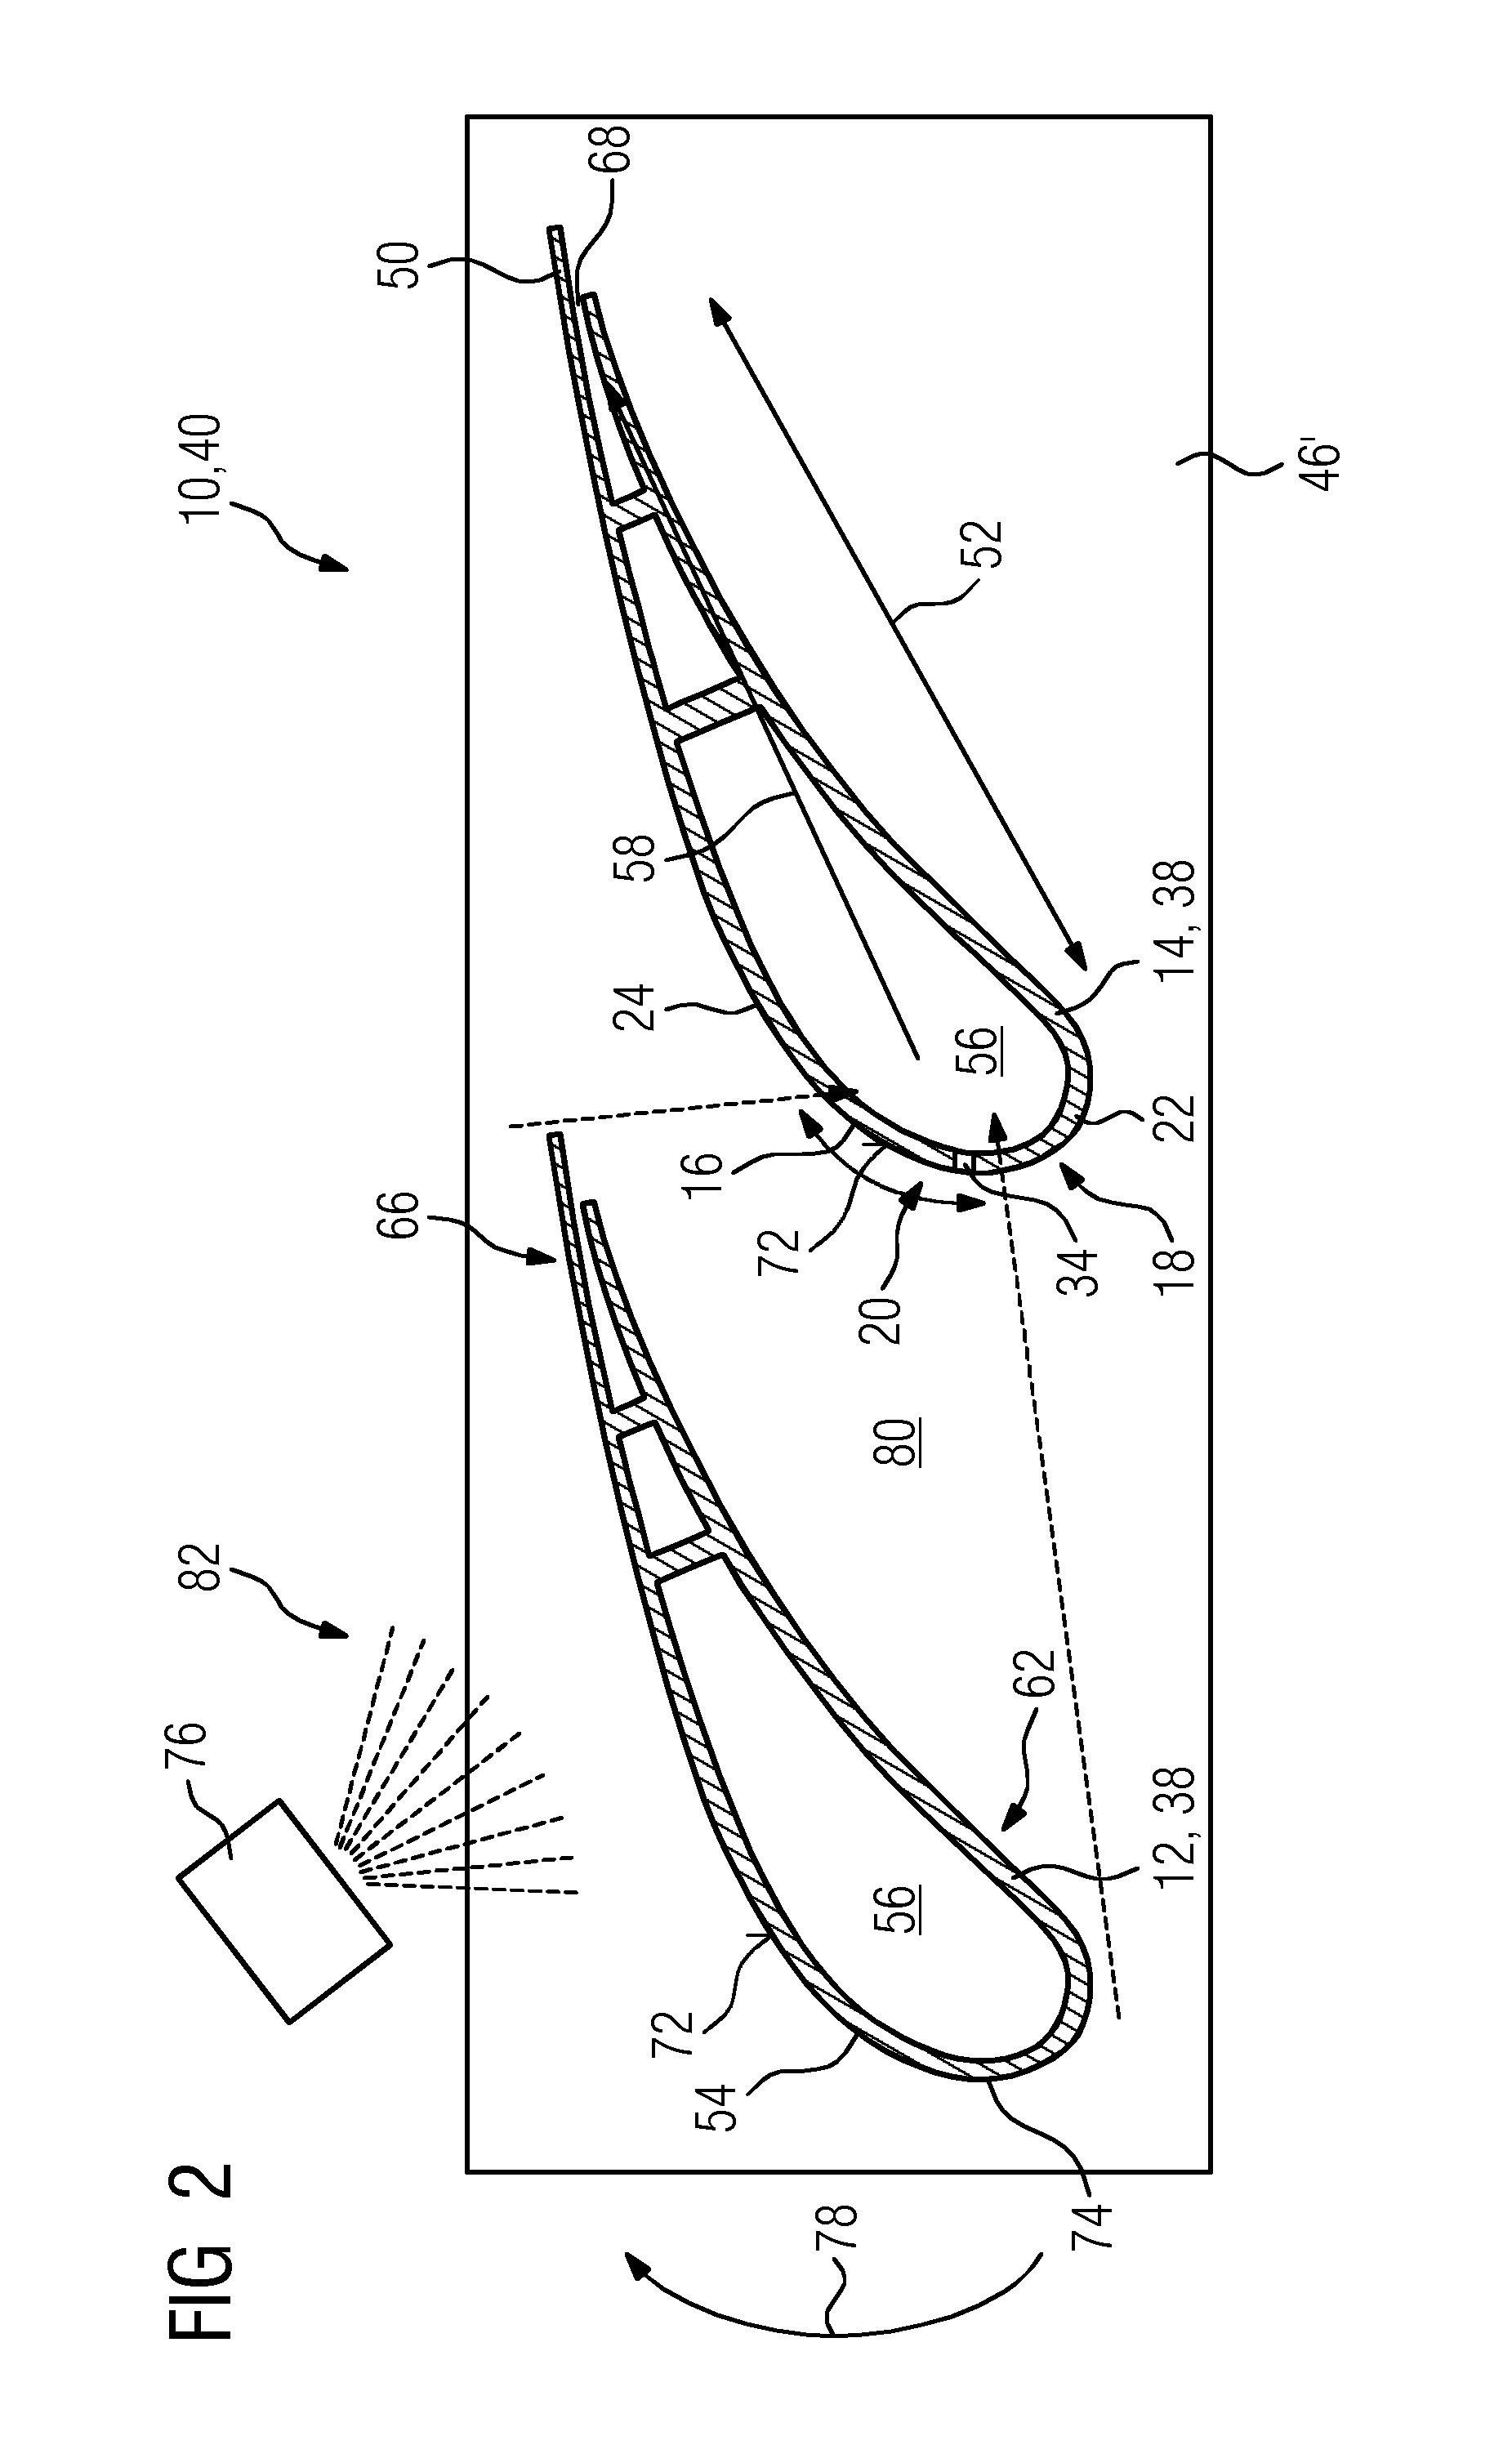 Method for manufacturing a turbine assembly